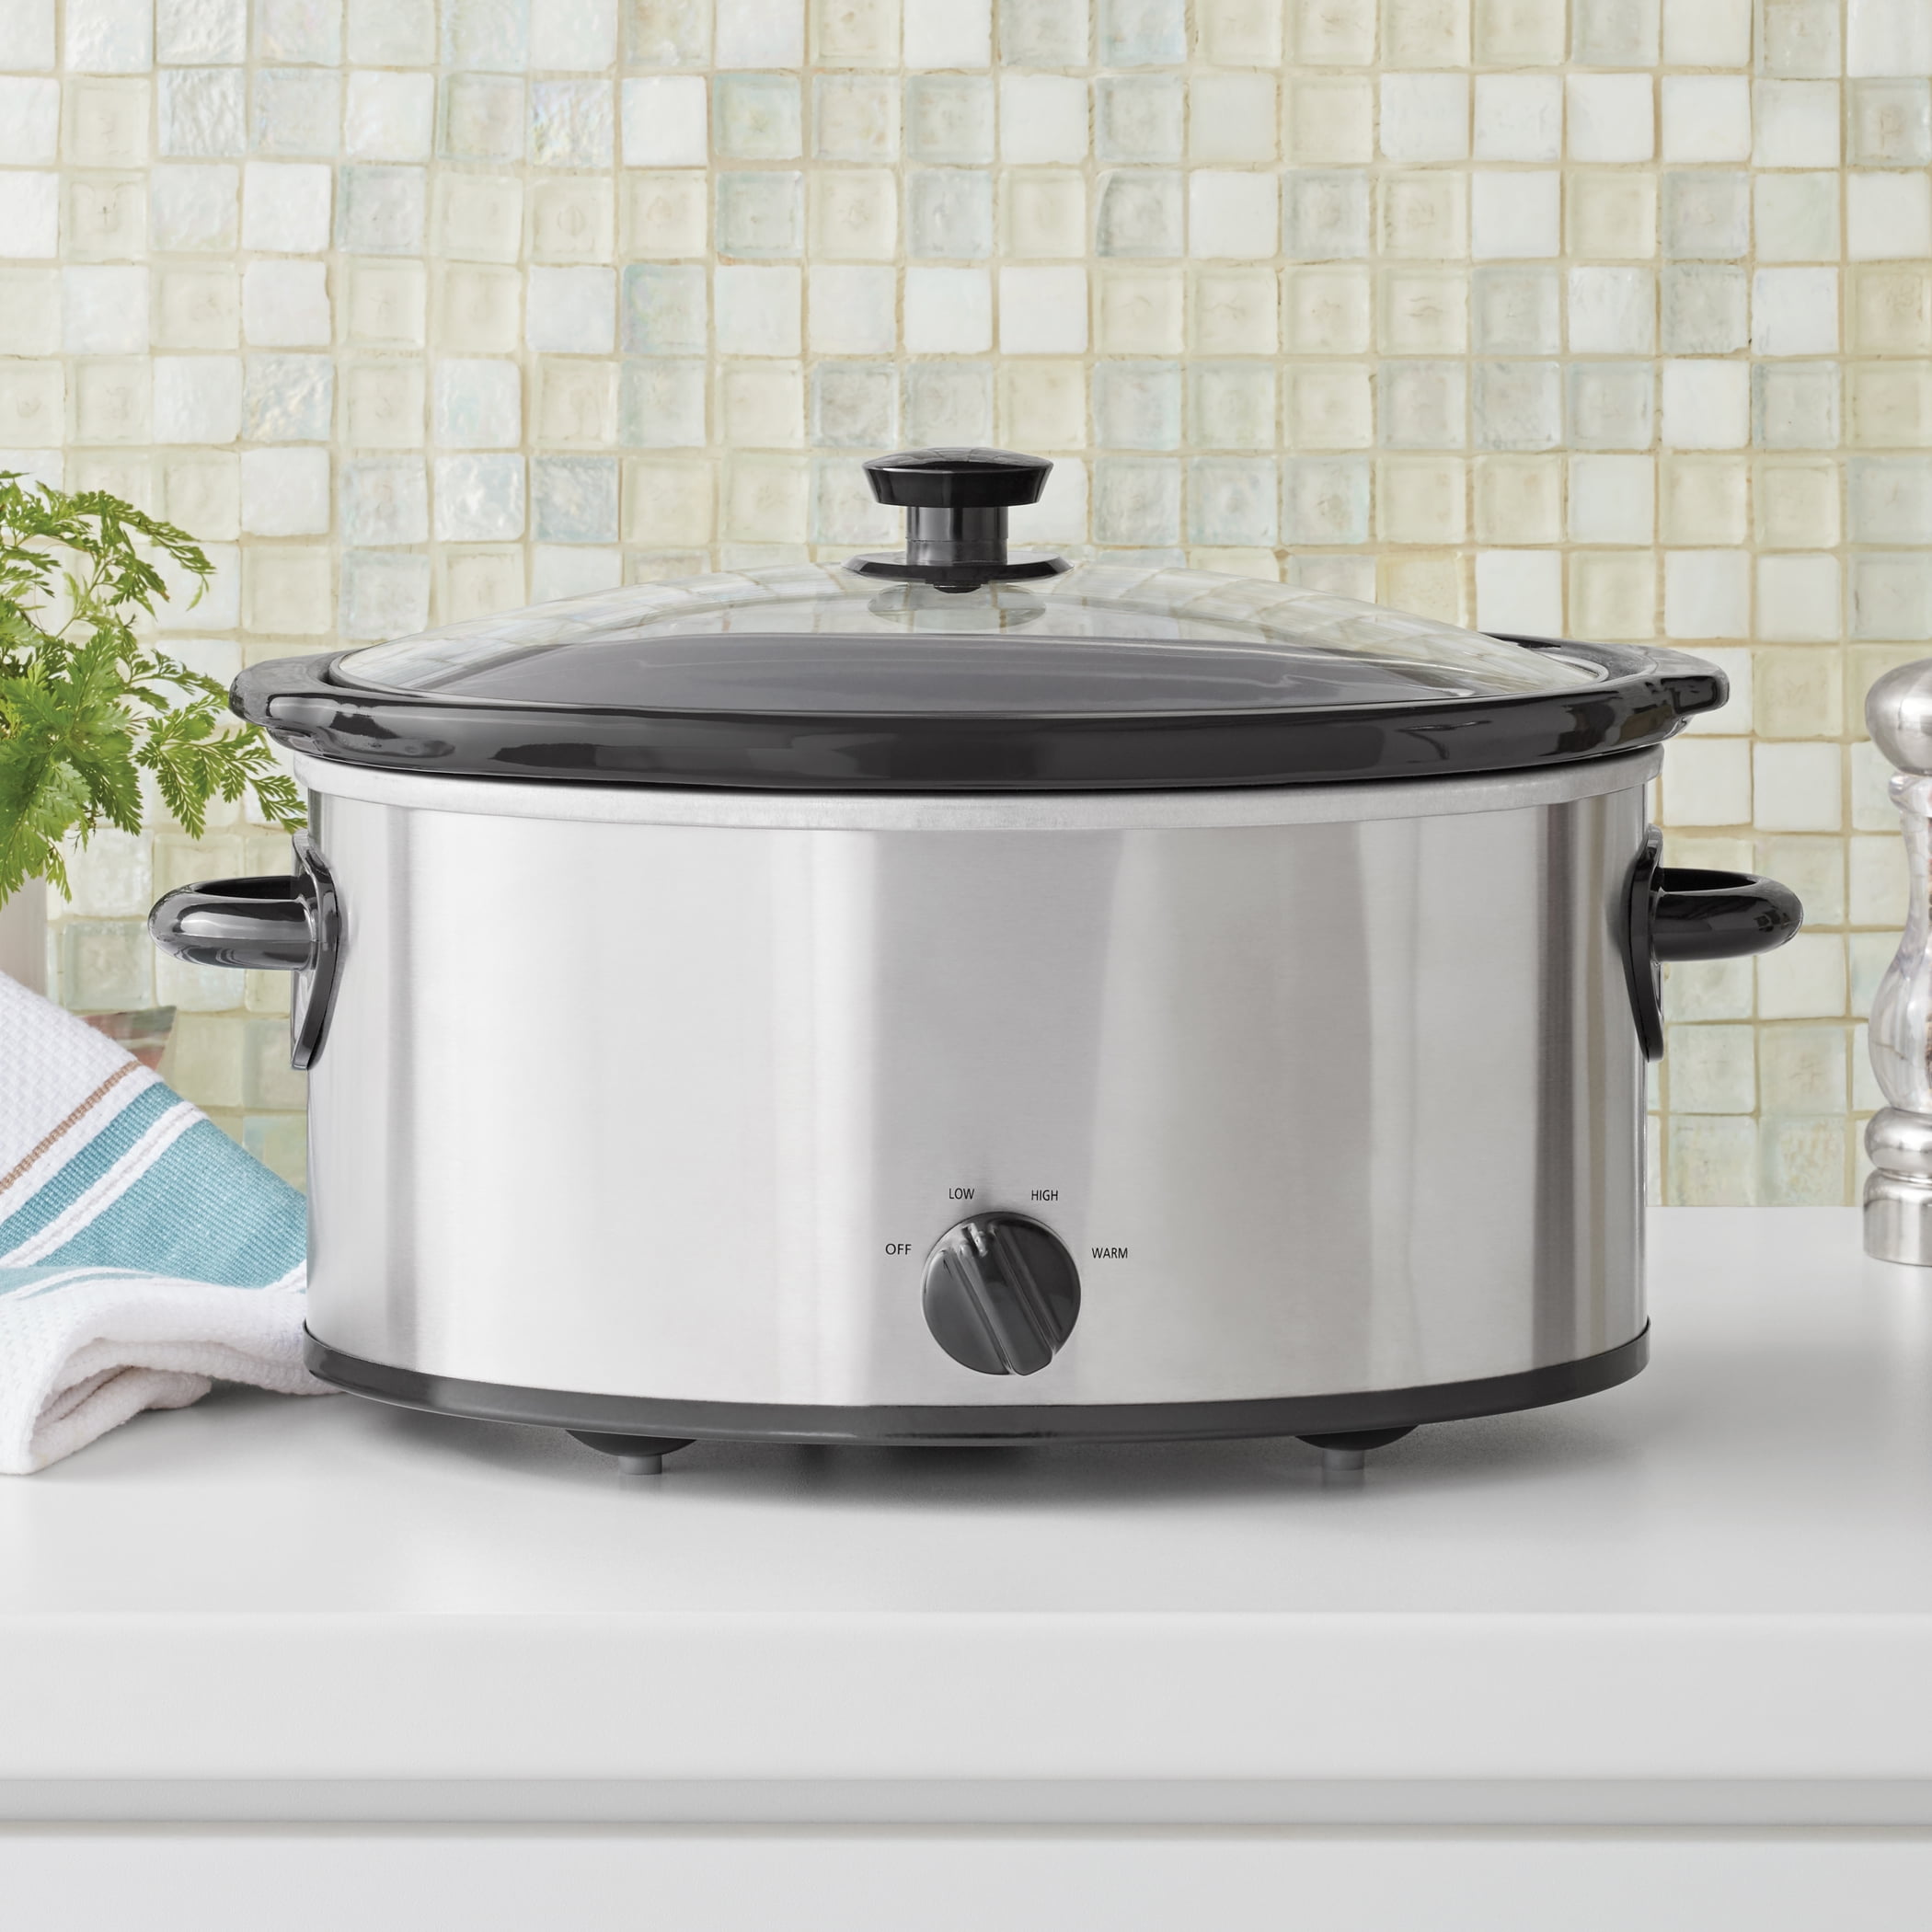 6-Quart Mainstays Oval Slow Cooker w/ Glass Lid (Stainless Steel) $19.98 + Free S&H w/ Walmart+ or $35+